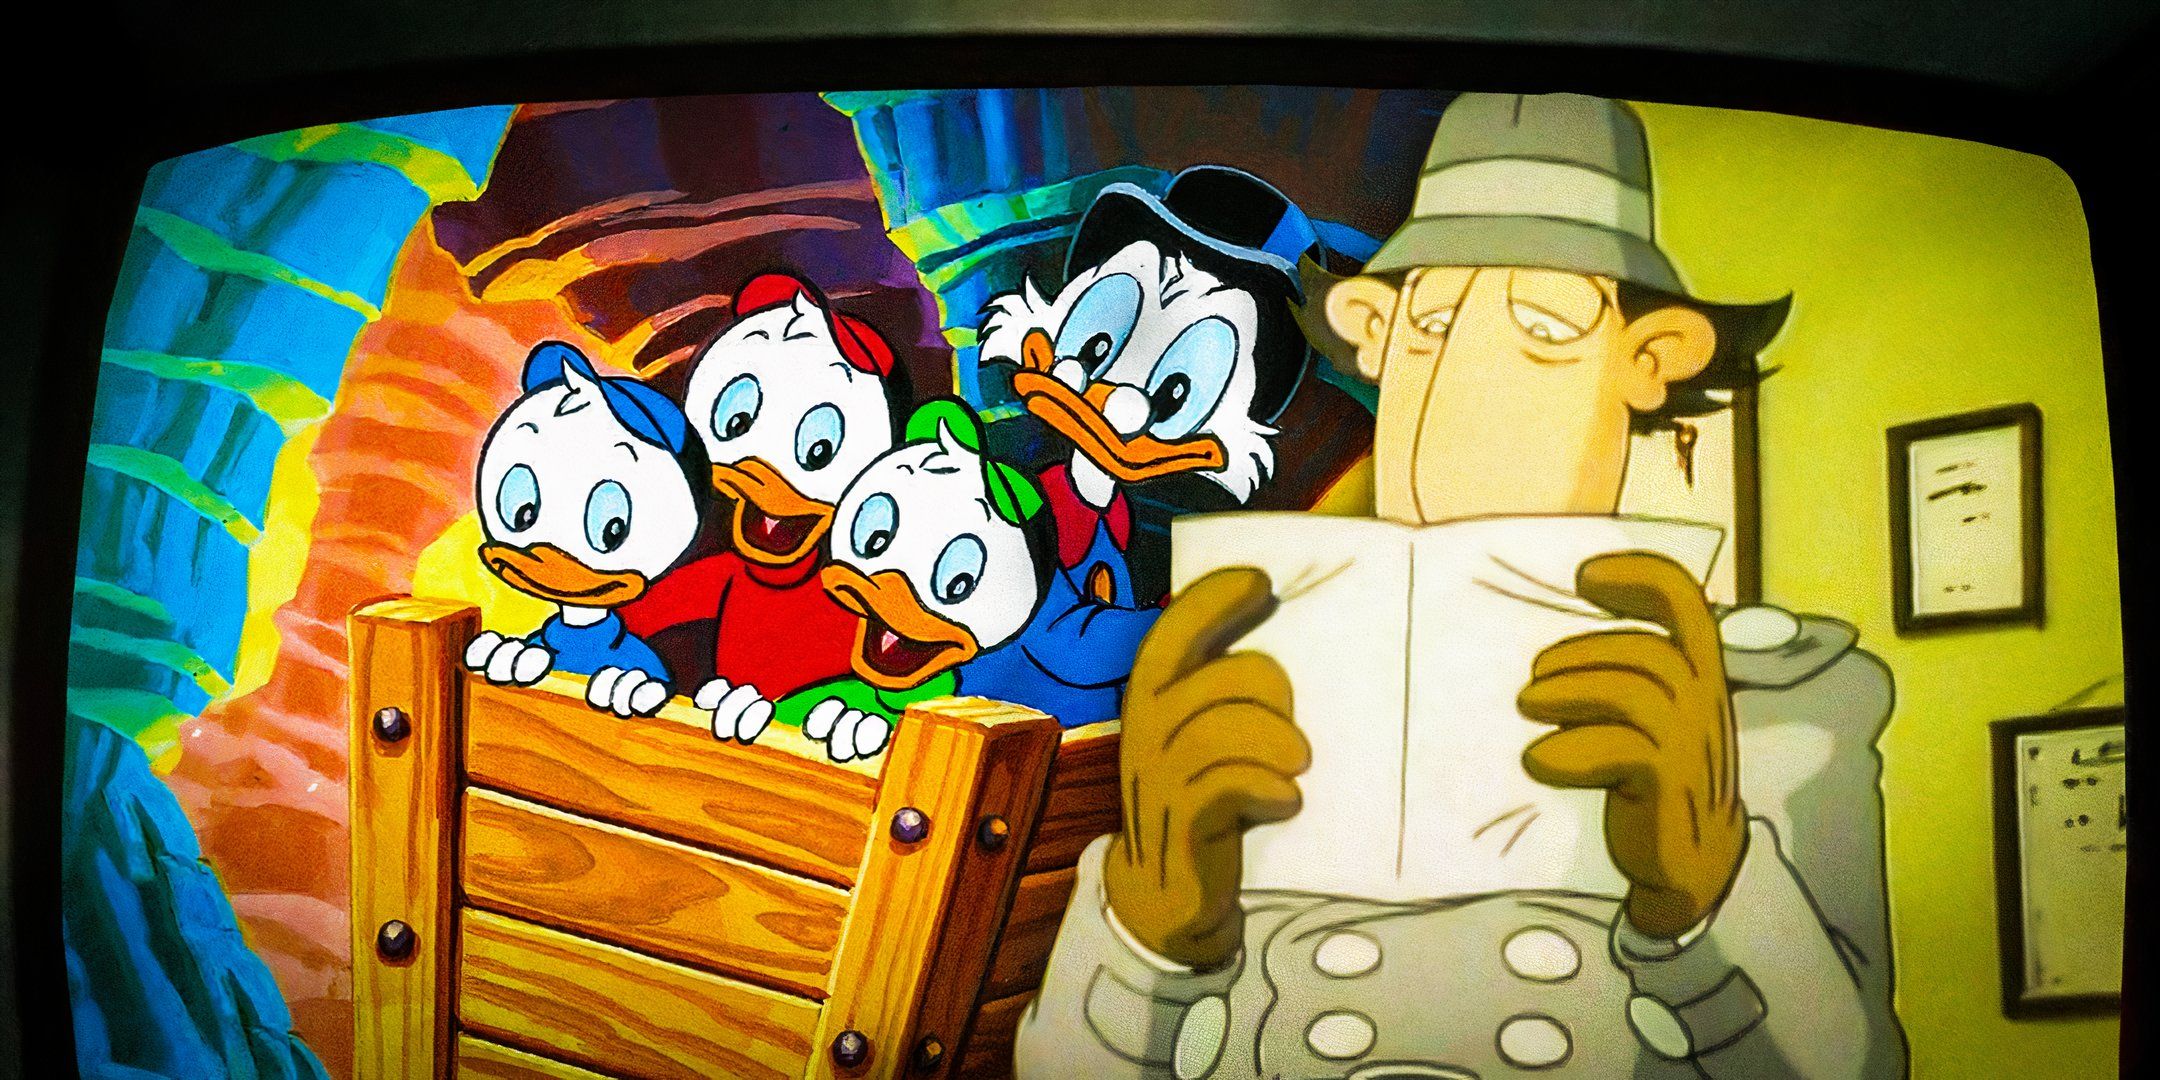 Custom image of scenes from DuckTales and Inspector Gadget.